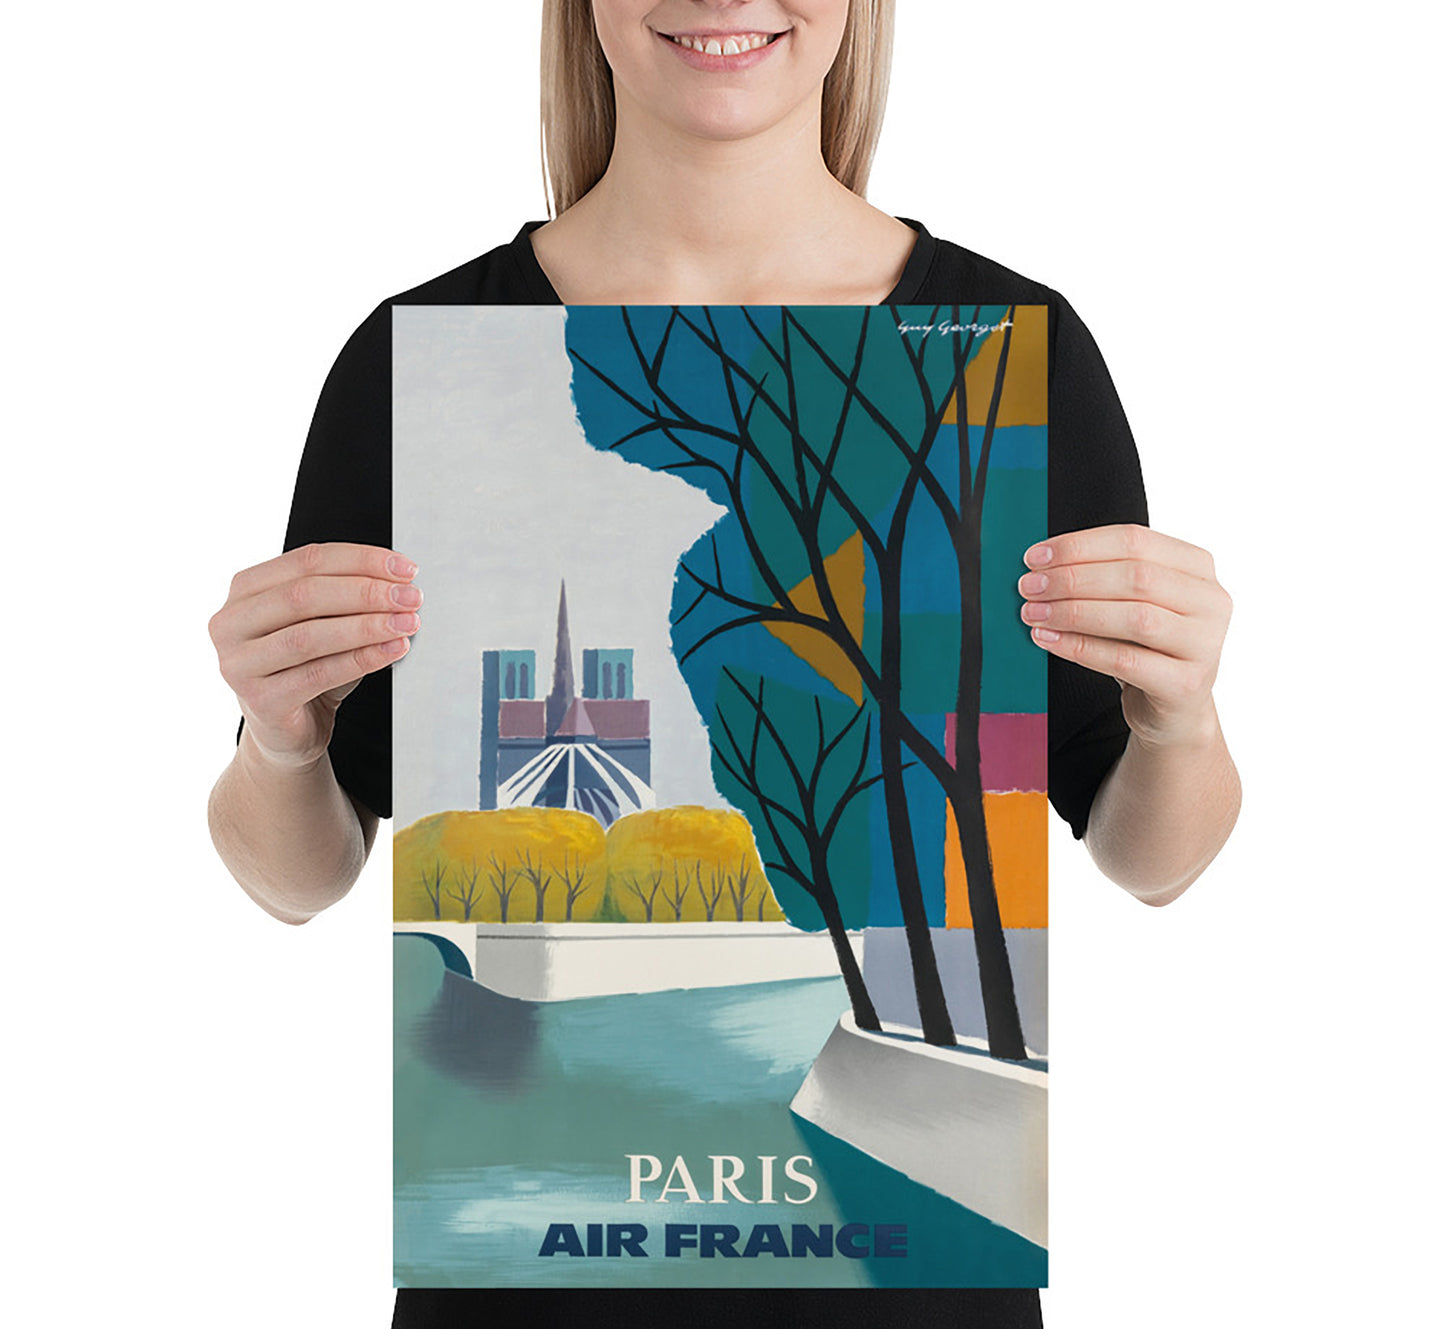 Air France, Paris, France vintage travel poster, Extra large wall art.